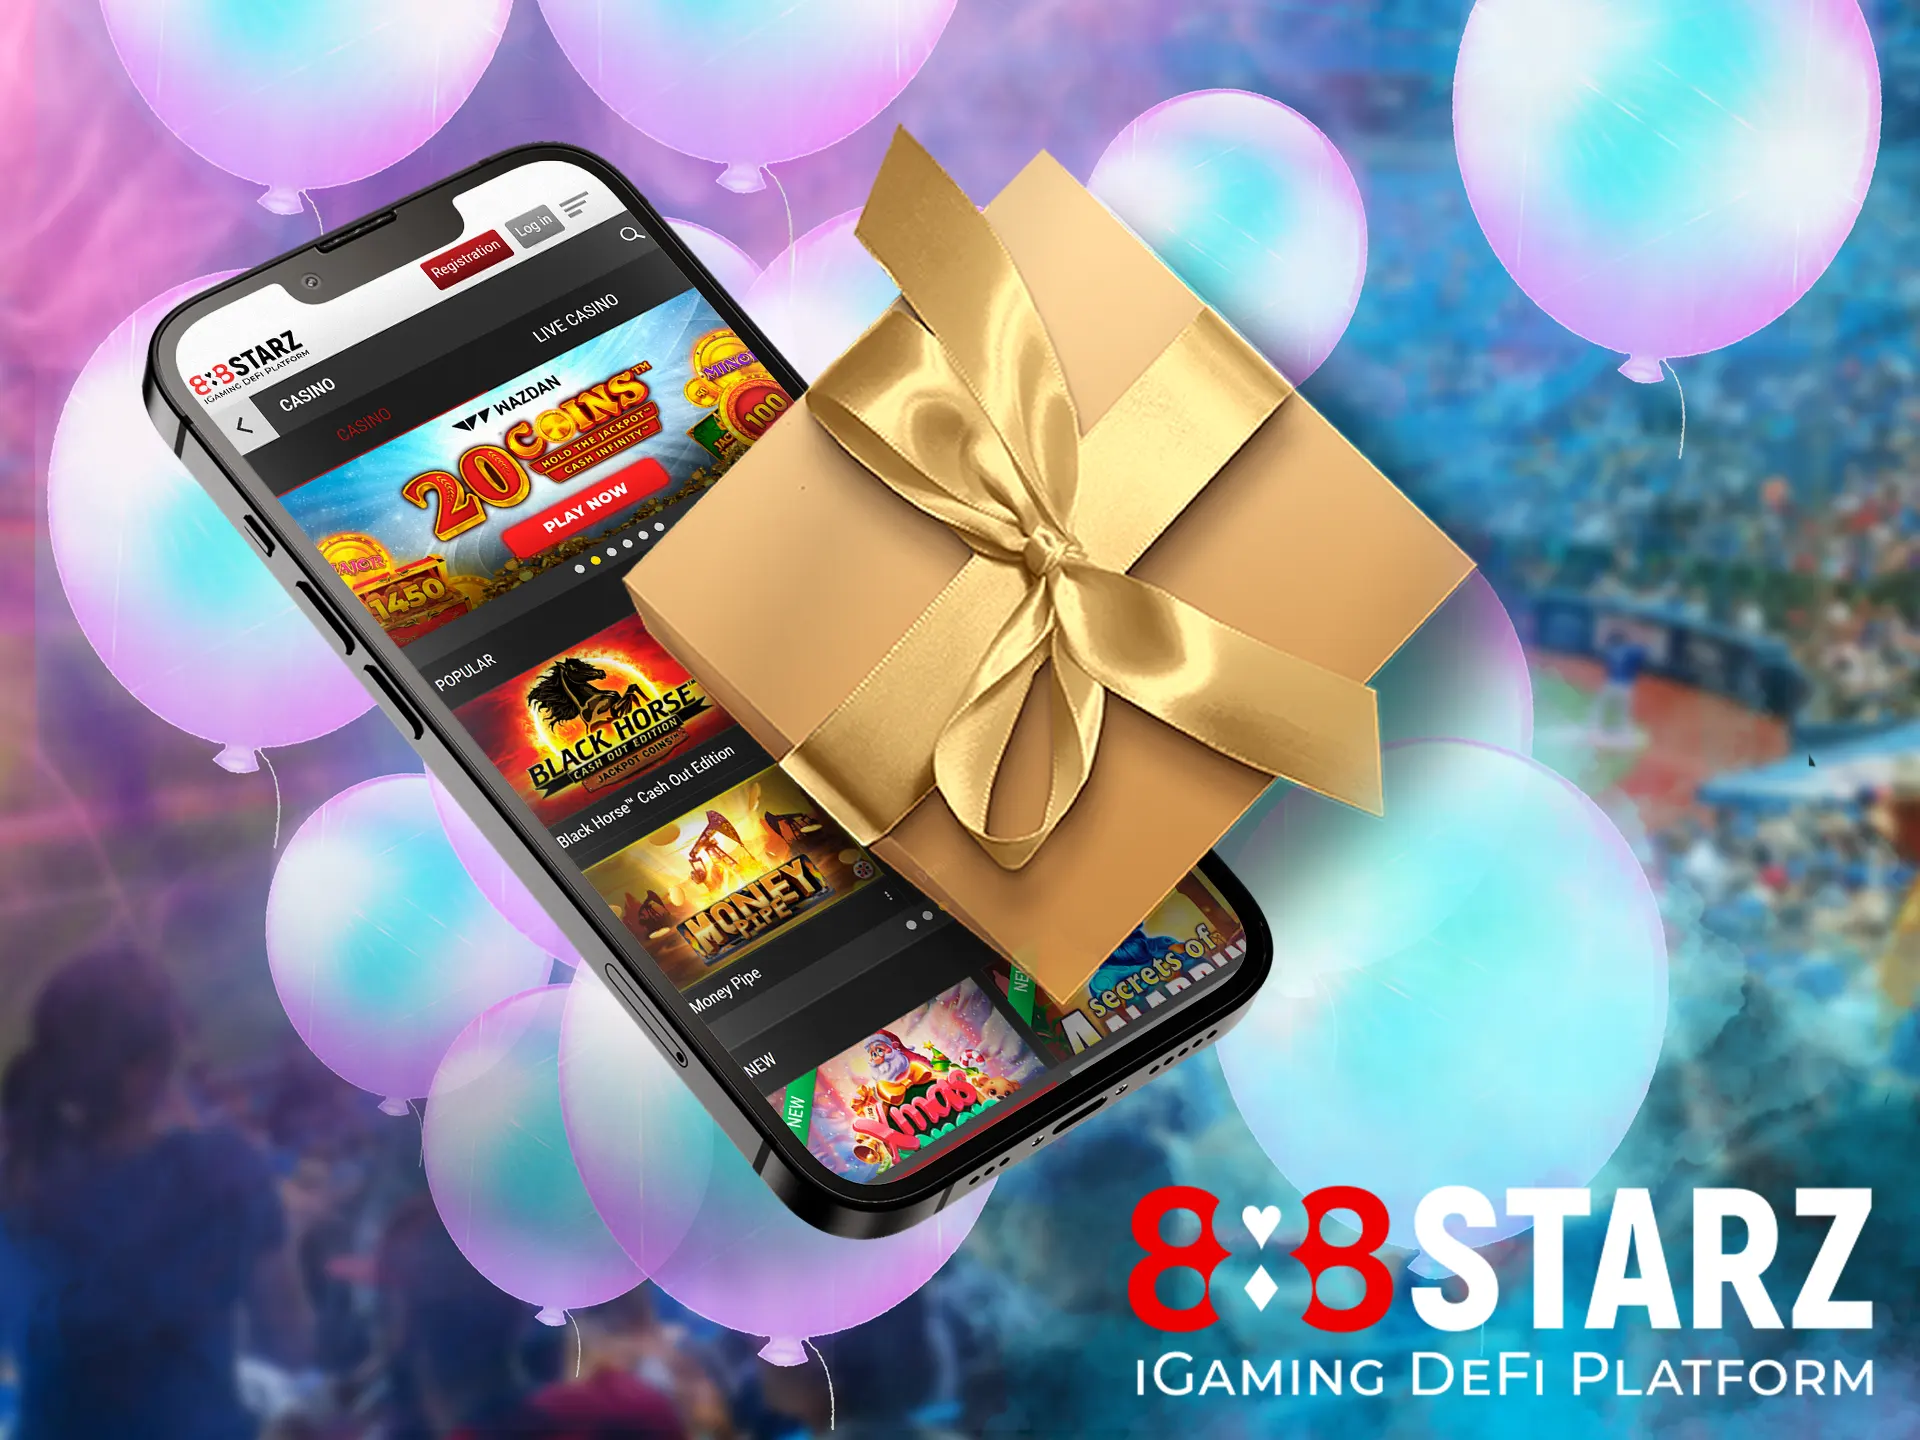 New users will receive a nice compliment from 888starz for creating an account, it can be used in both casino and sports betting.